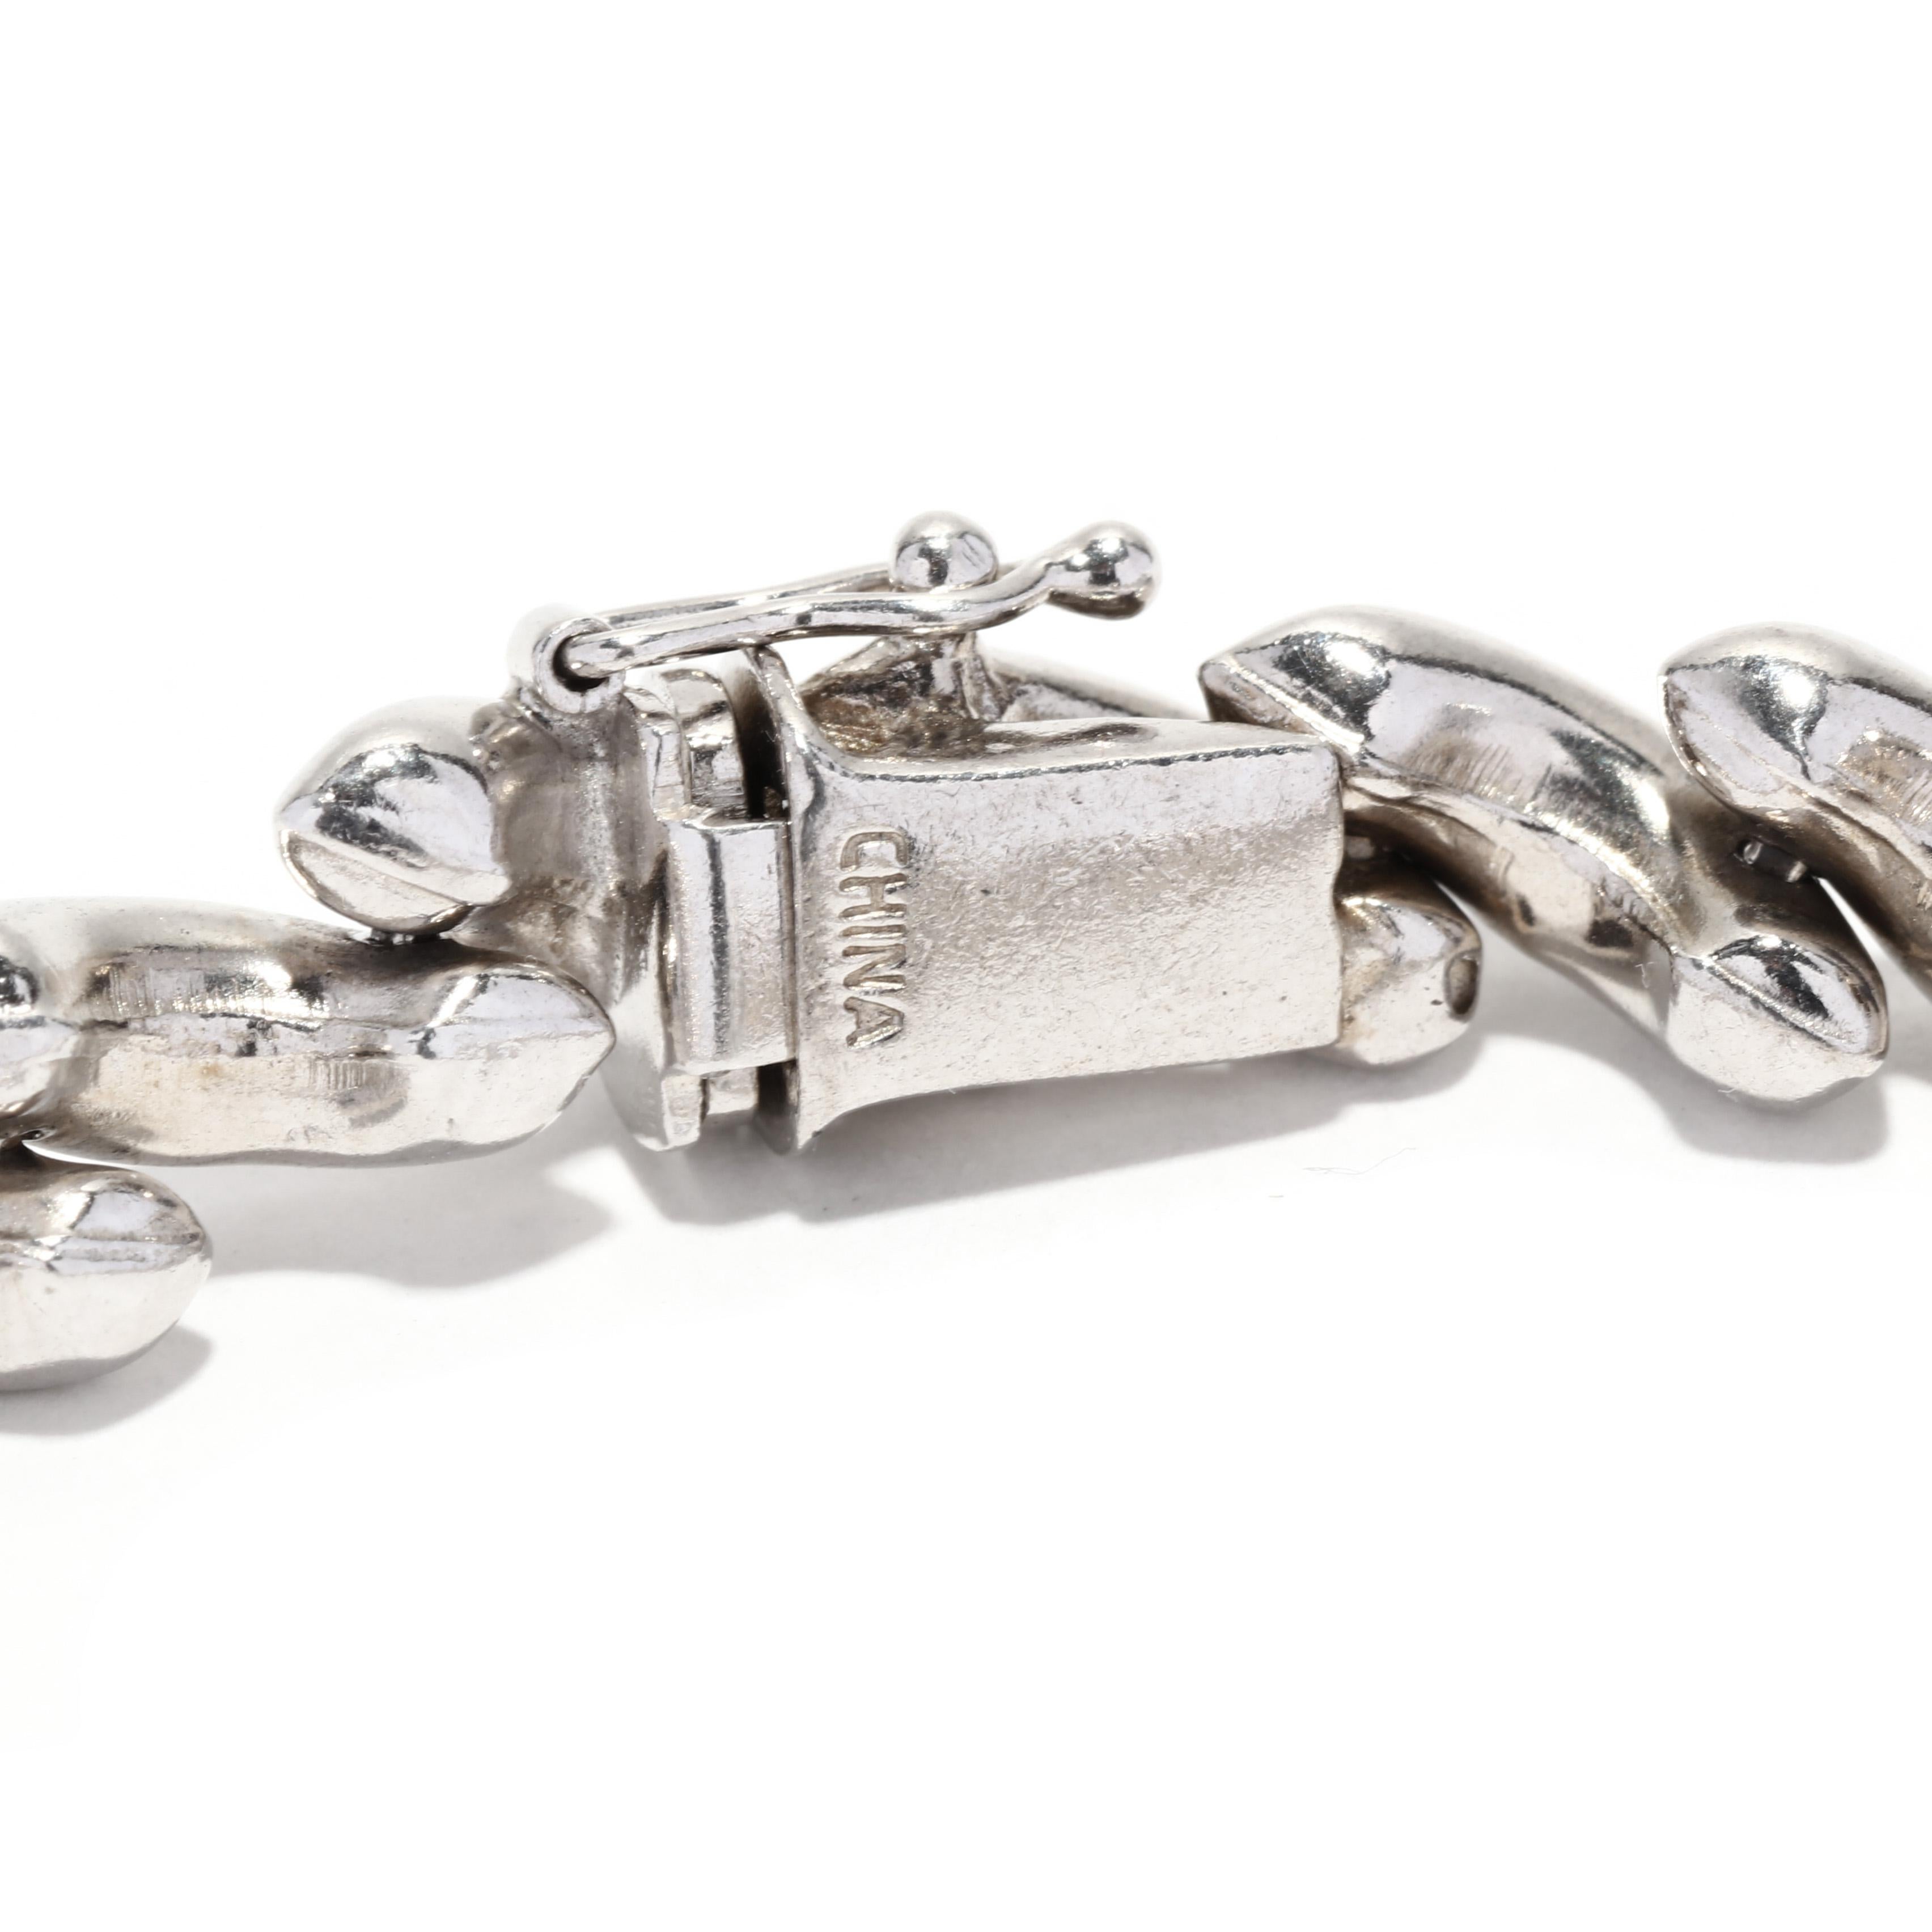 This Sterling Silver San Marco Link Bracelet is the perfect way to add a touch of elegance to your look! The 7.25 inch chain link bracelet features a classic San Marco design that is sure to turn heads. The delicate links are perfect for everyday